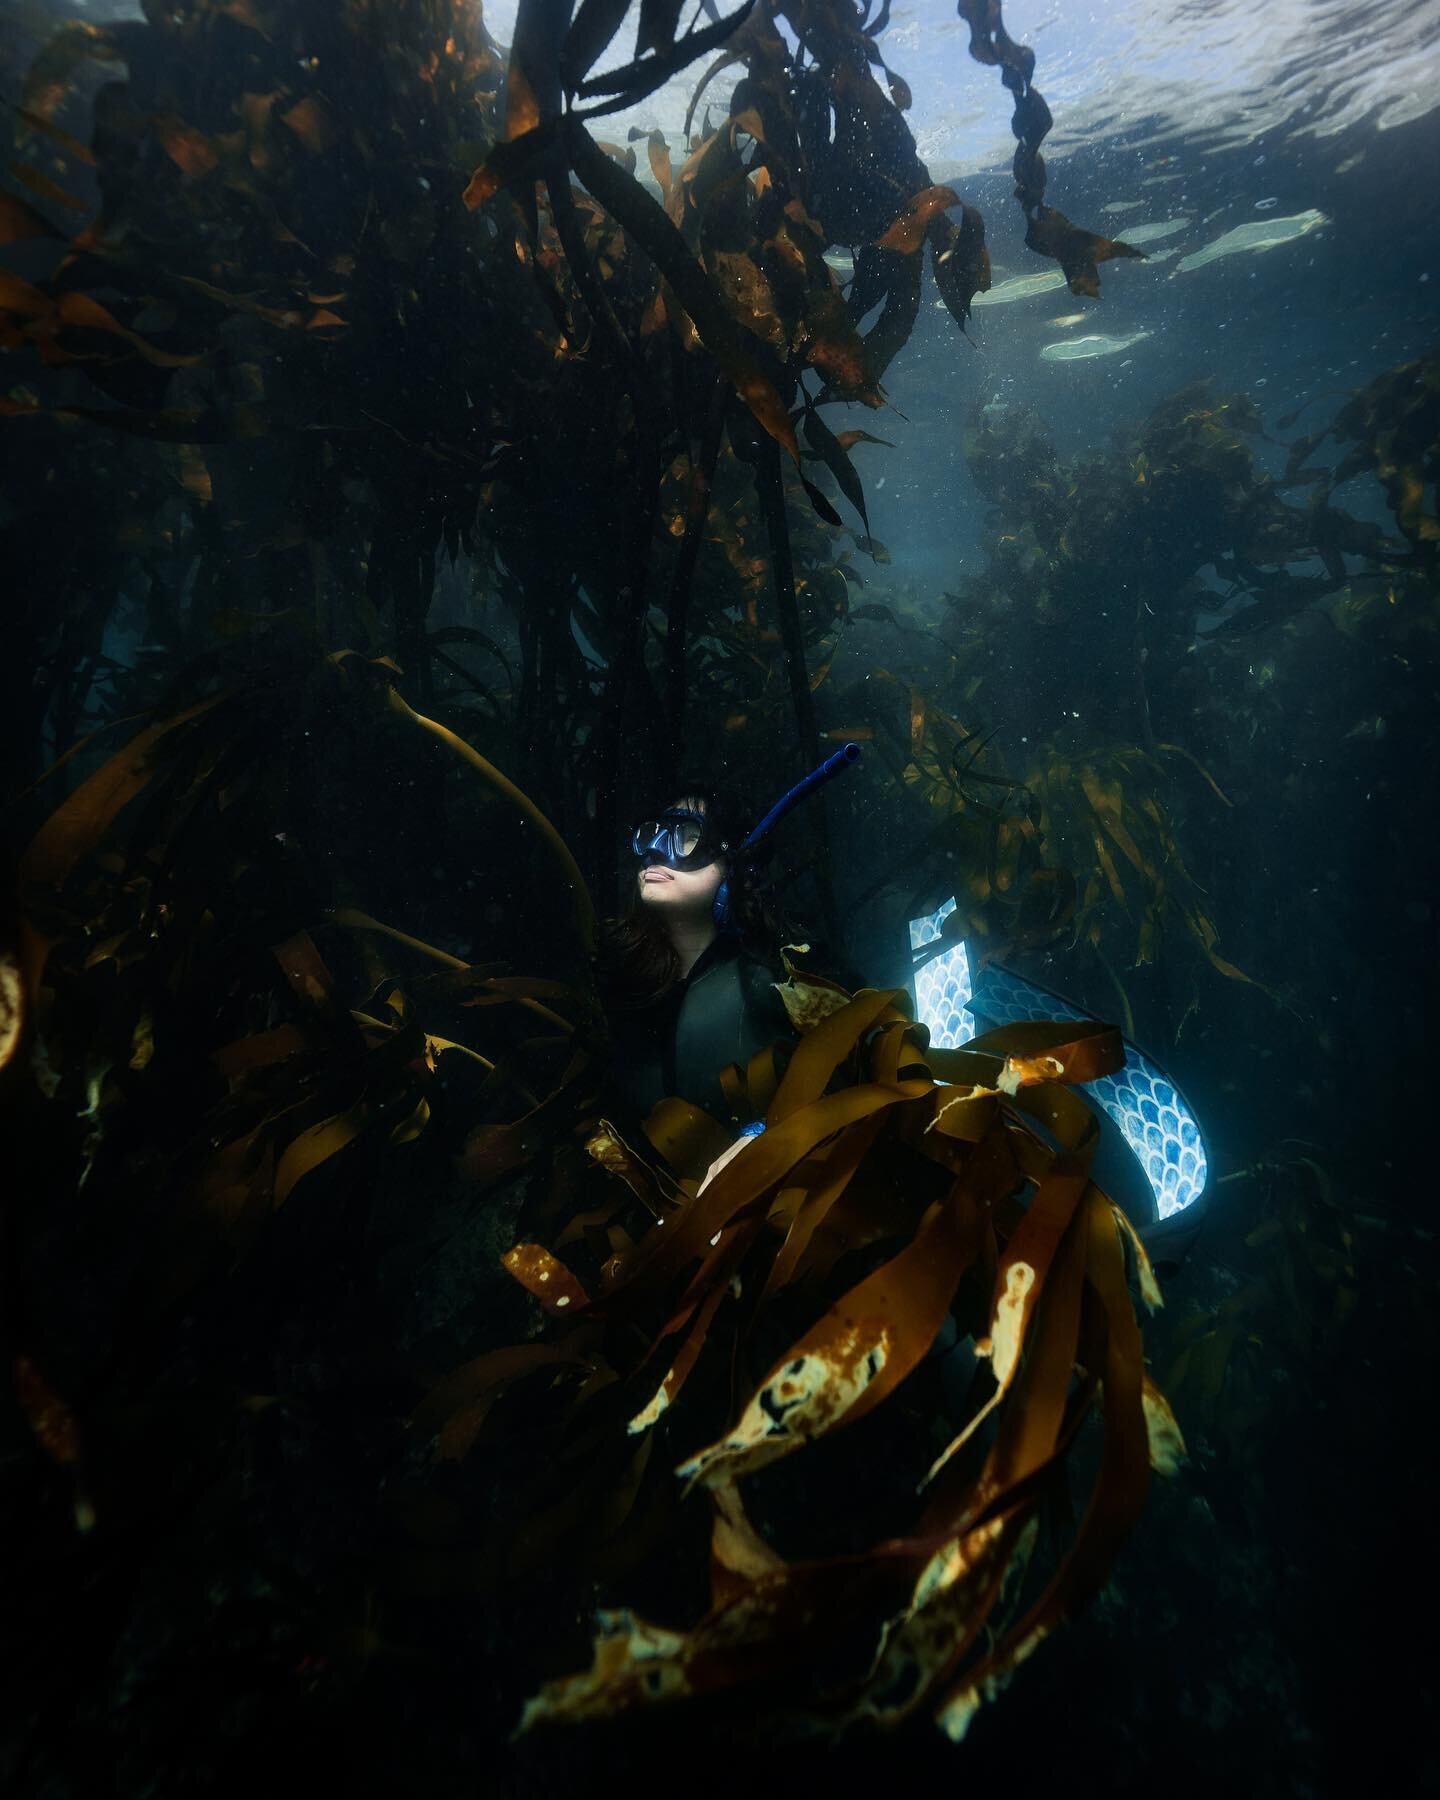 The first time I dived in a kelp forest, I was terrified &mdash; what unknown creatures lay in these murky underwater woods? 

Years later, I feel at peace here. The kelp is a safety net from surge, swell, and larger animals; a calm home amidst the c